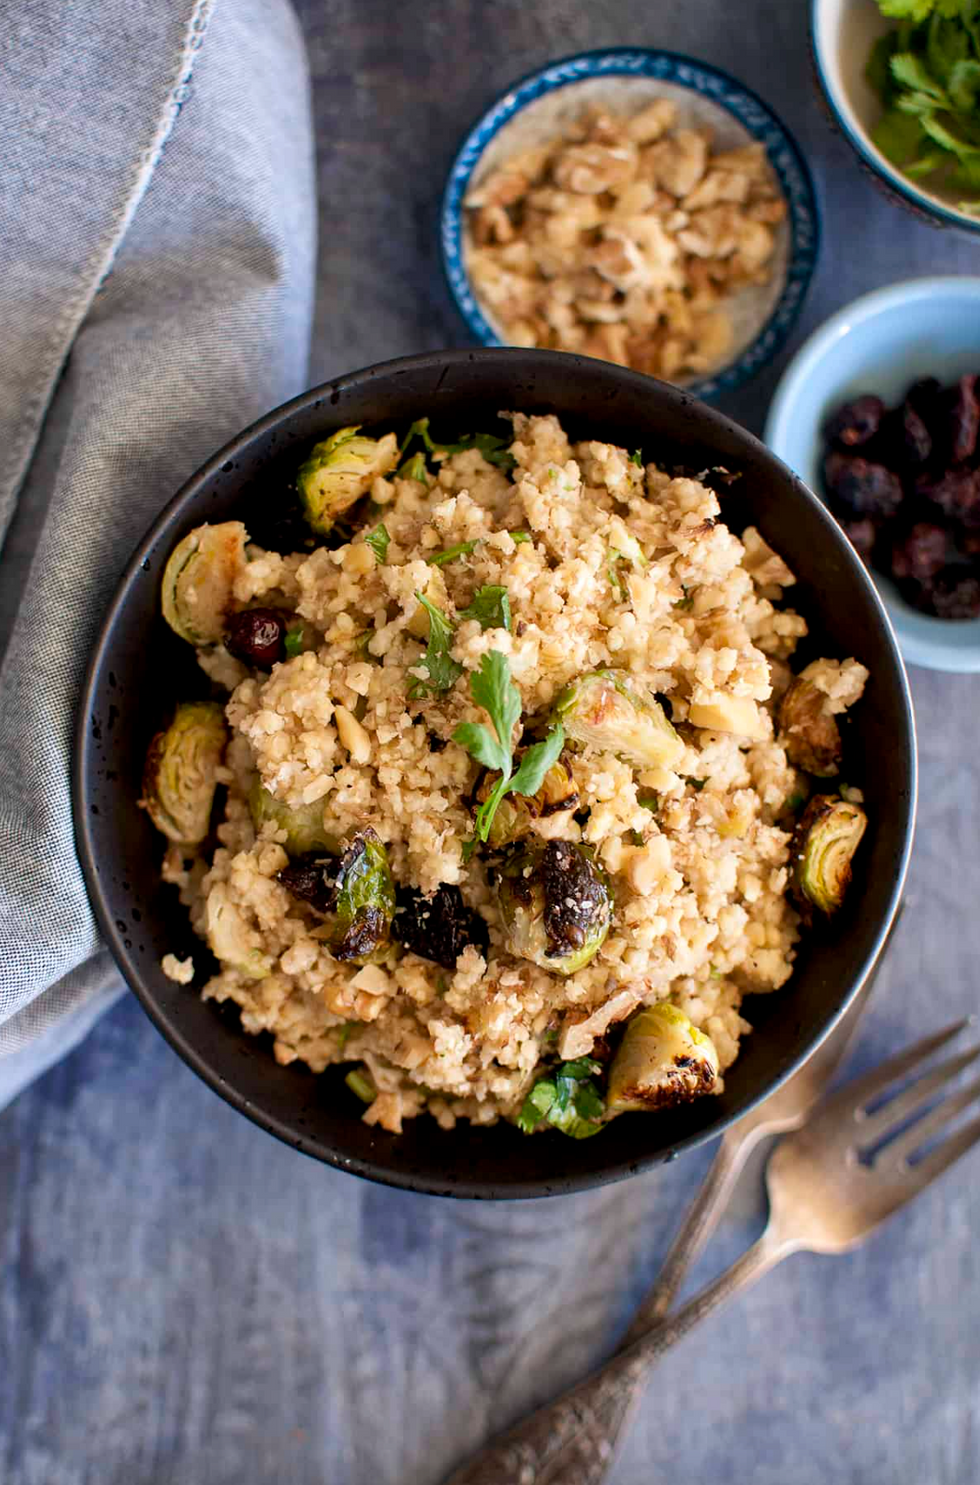 Warm Millet Salad with Brussels Sprouts, Dried Cranberries and Walnuts